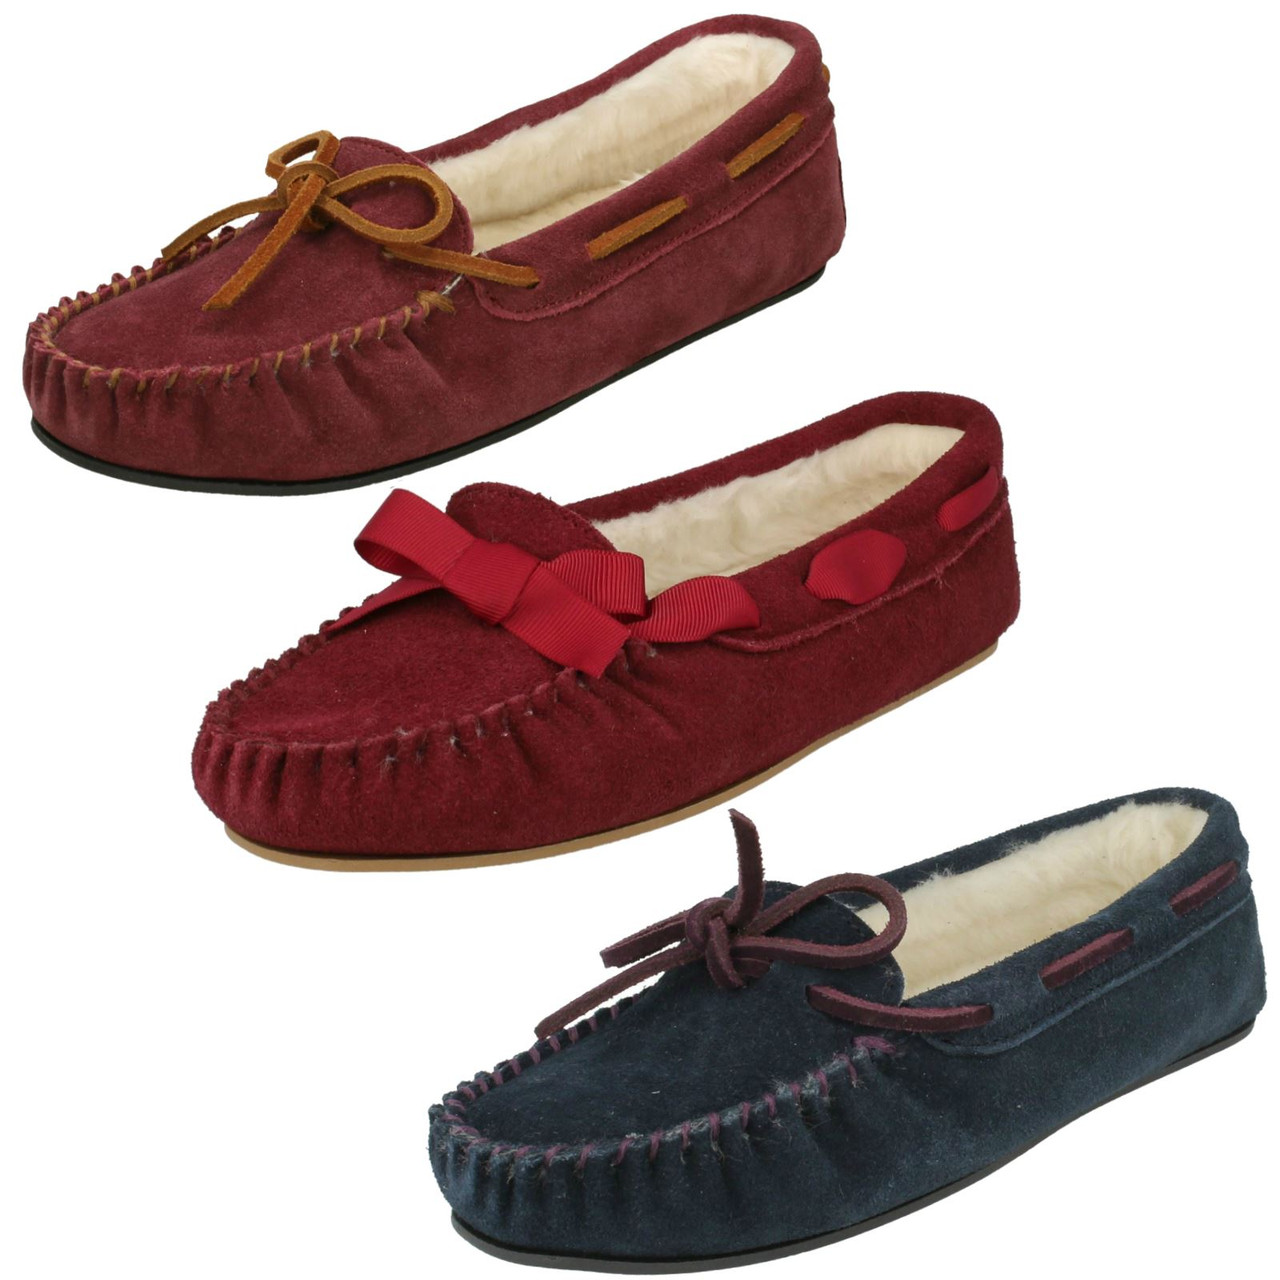 clarks suede moccasin slippers